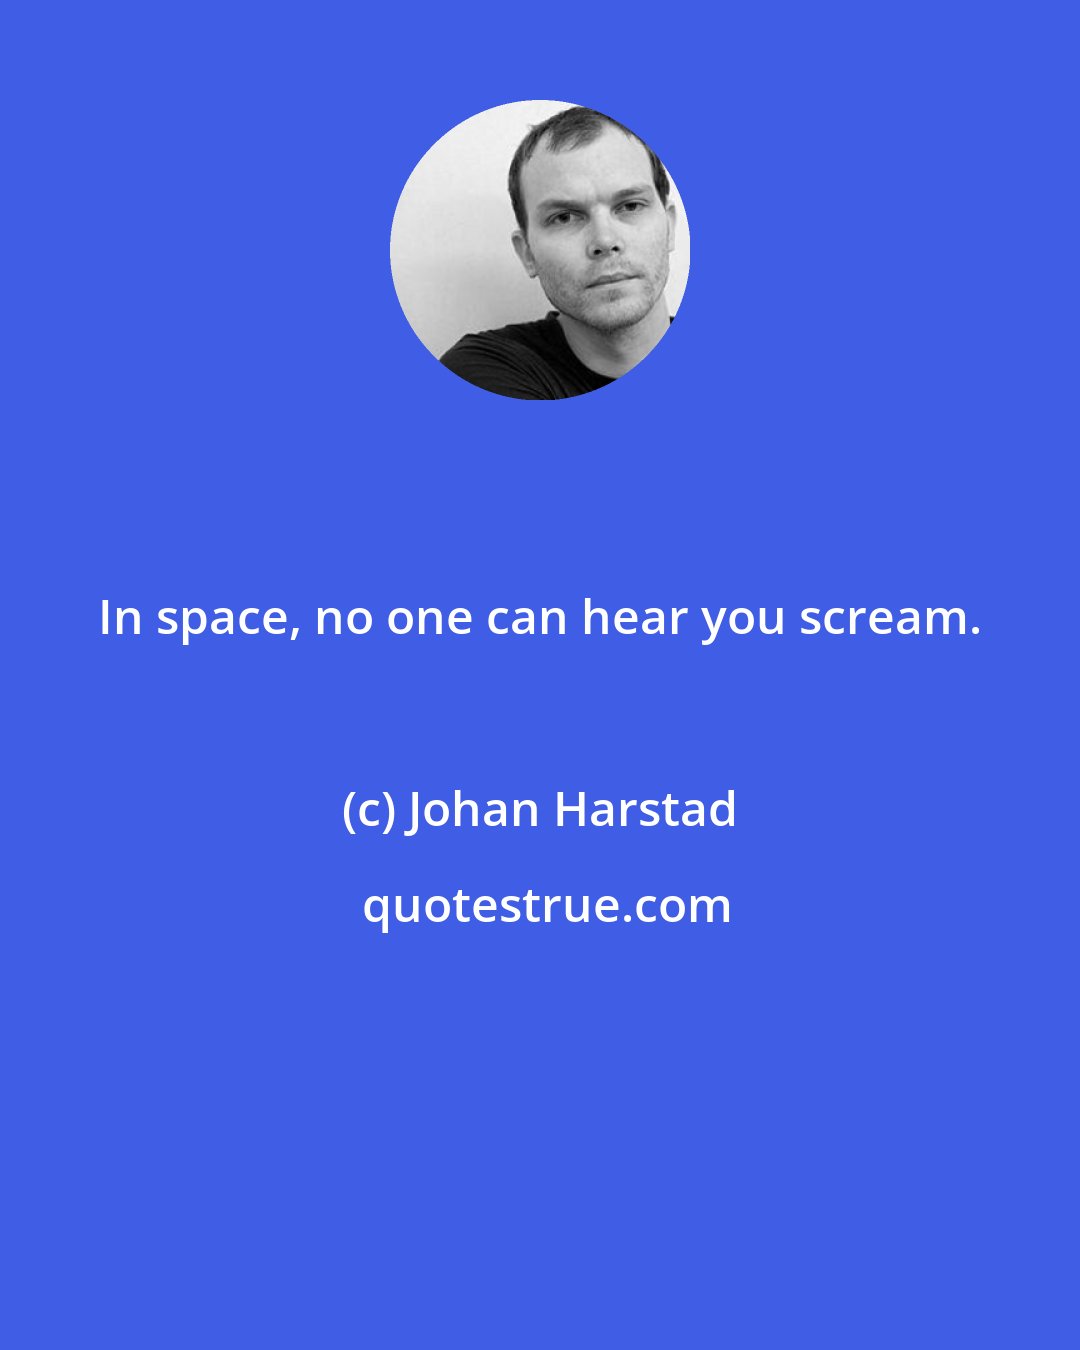 Johan Harstad: In space, no one can hear you scream.